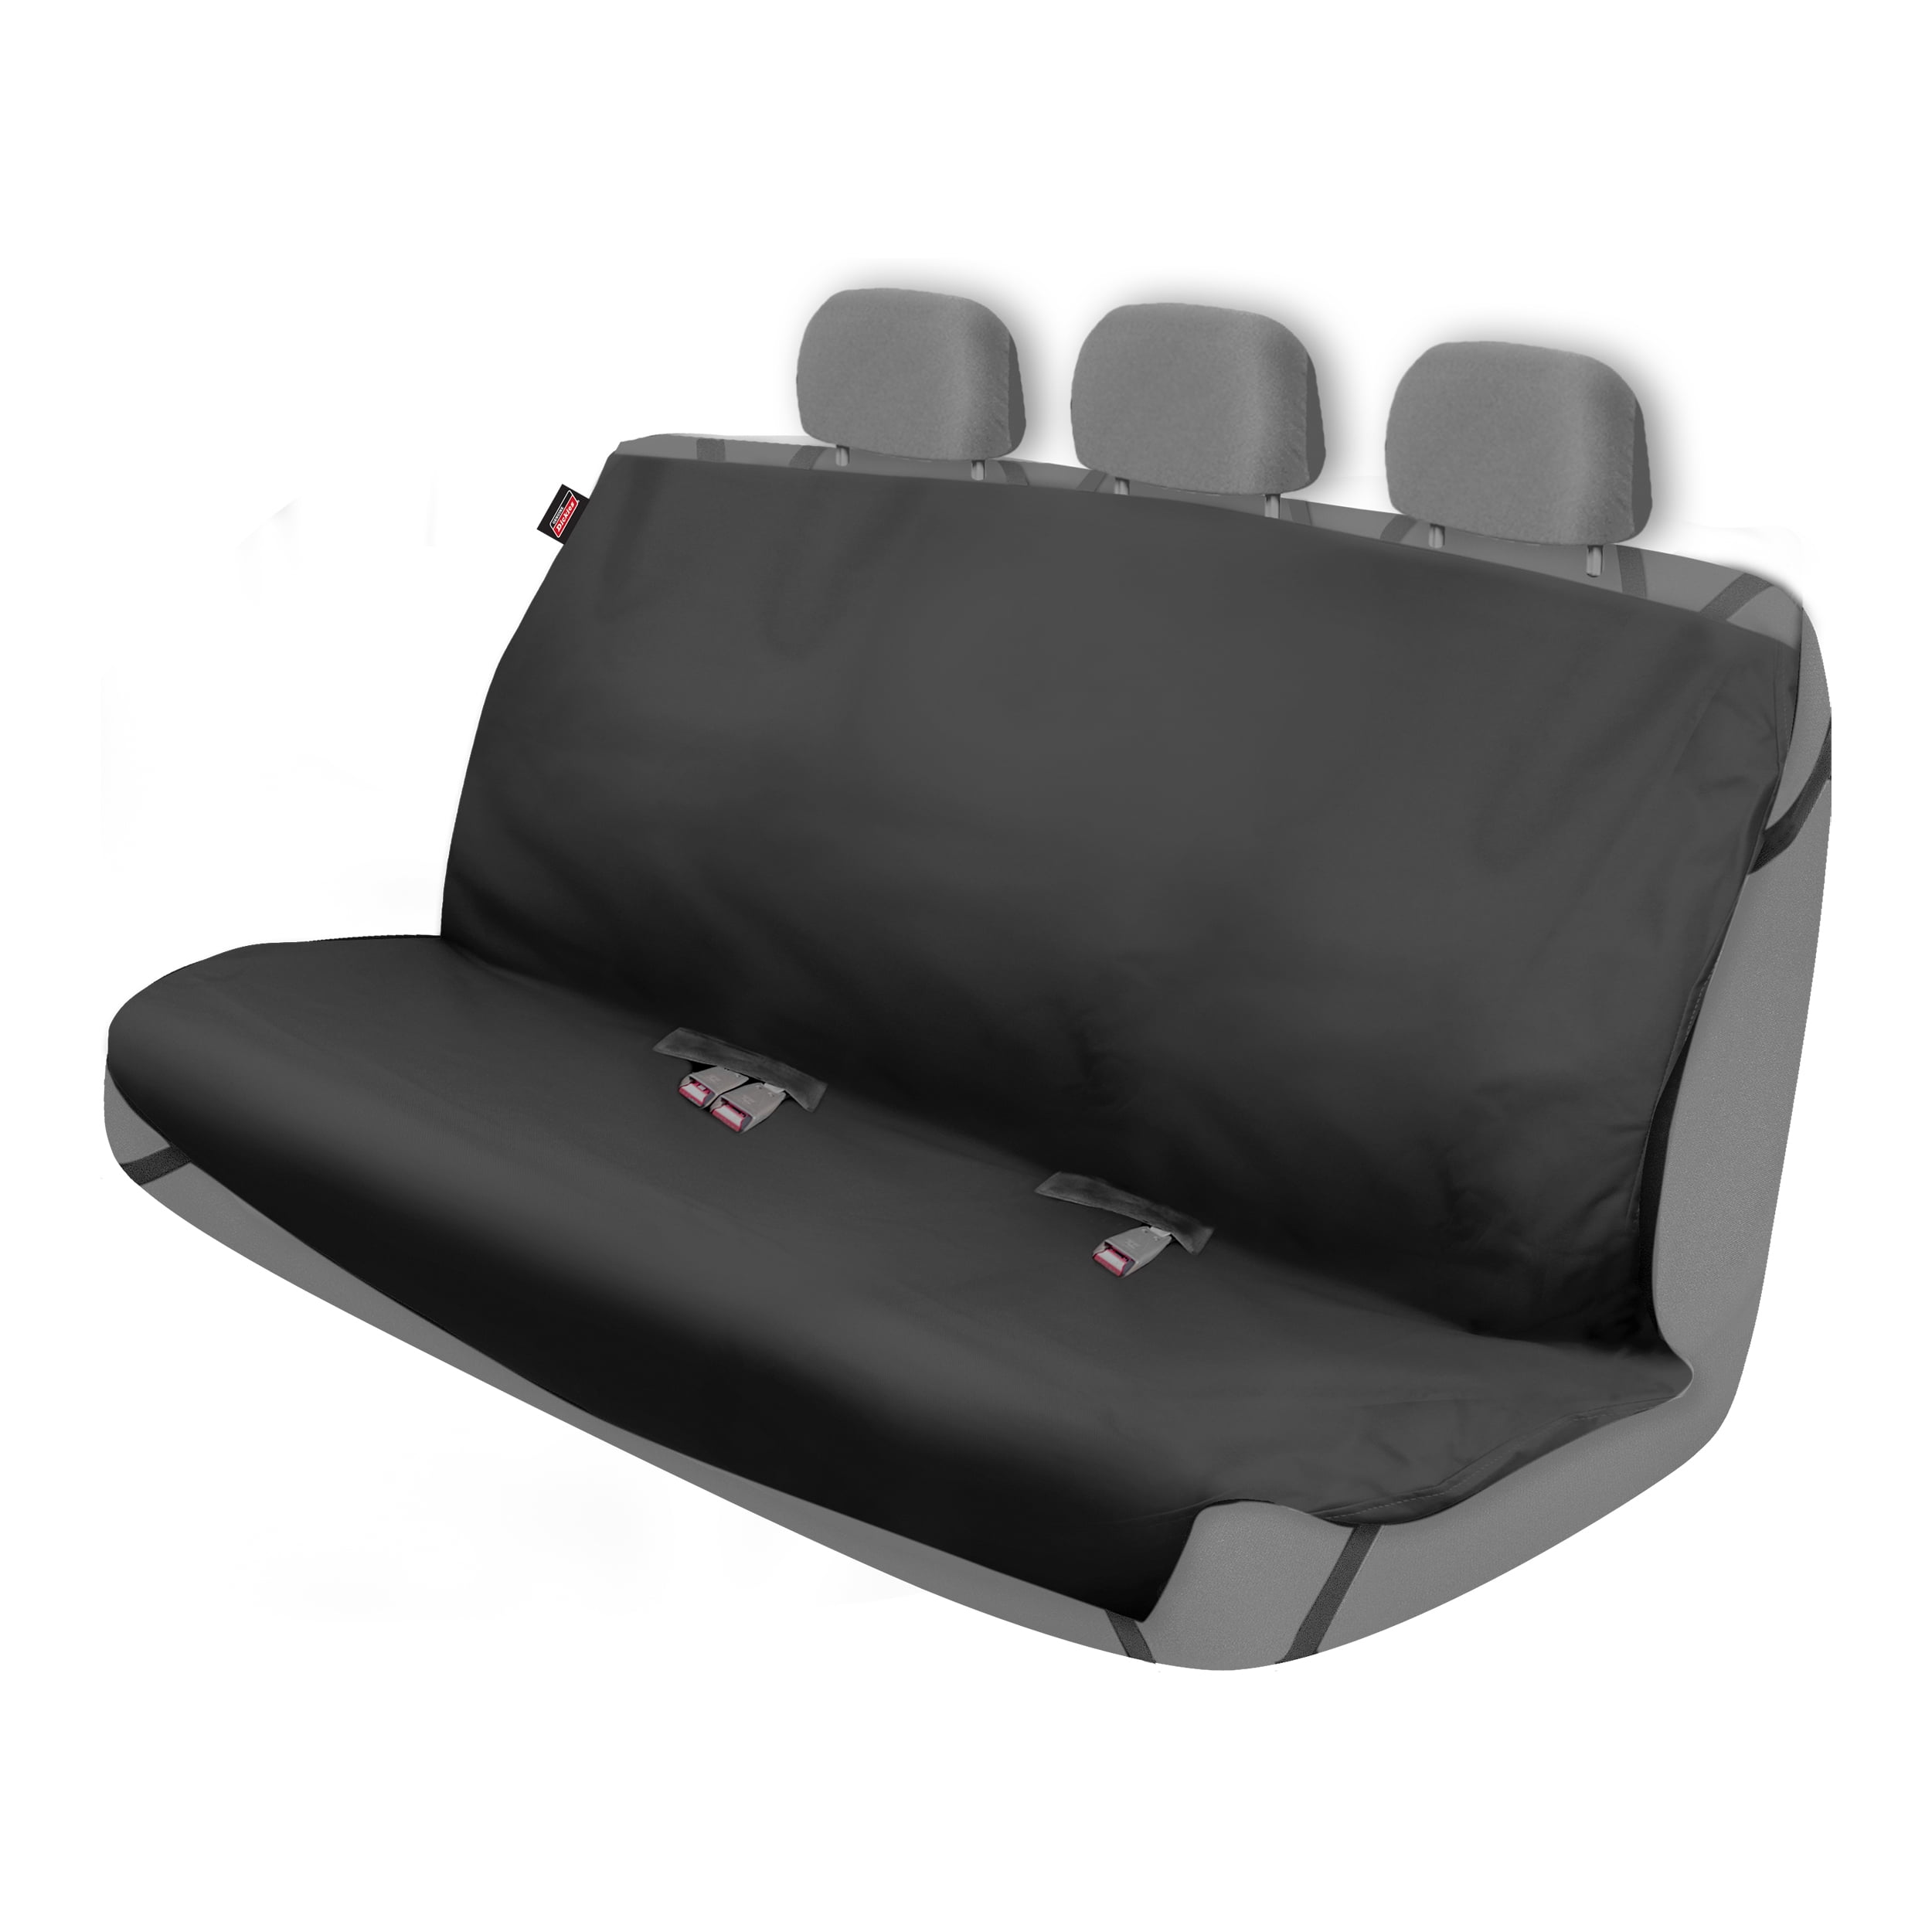 Genuine Dickies 1 Piece Repreve Rear Seat Cover and Protector Black, 43164WDI